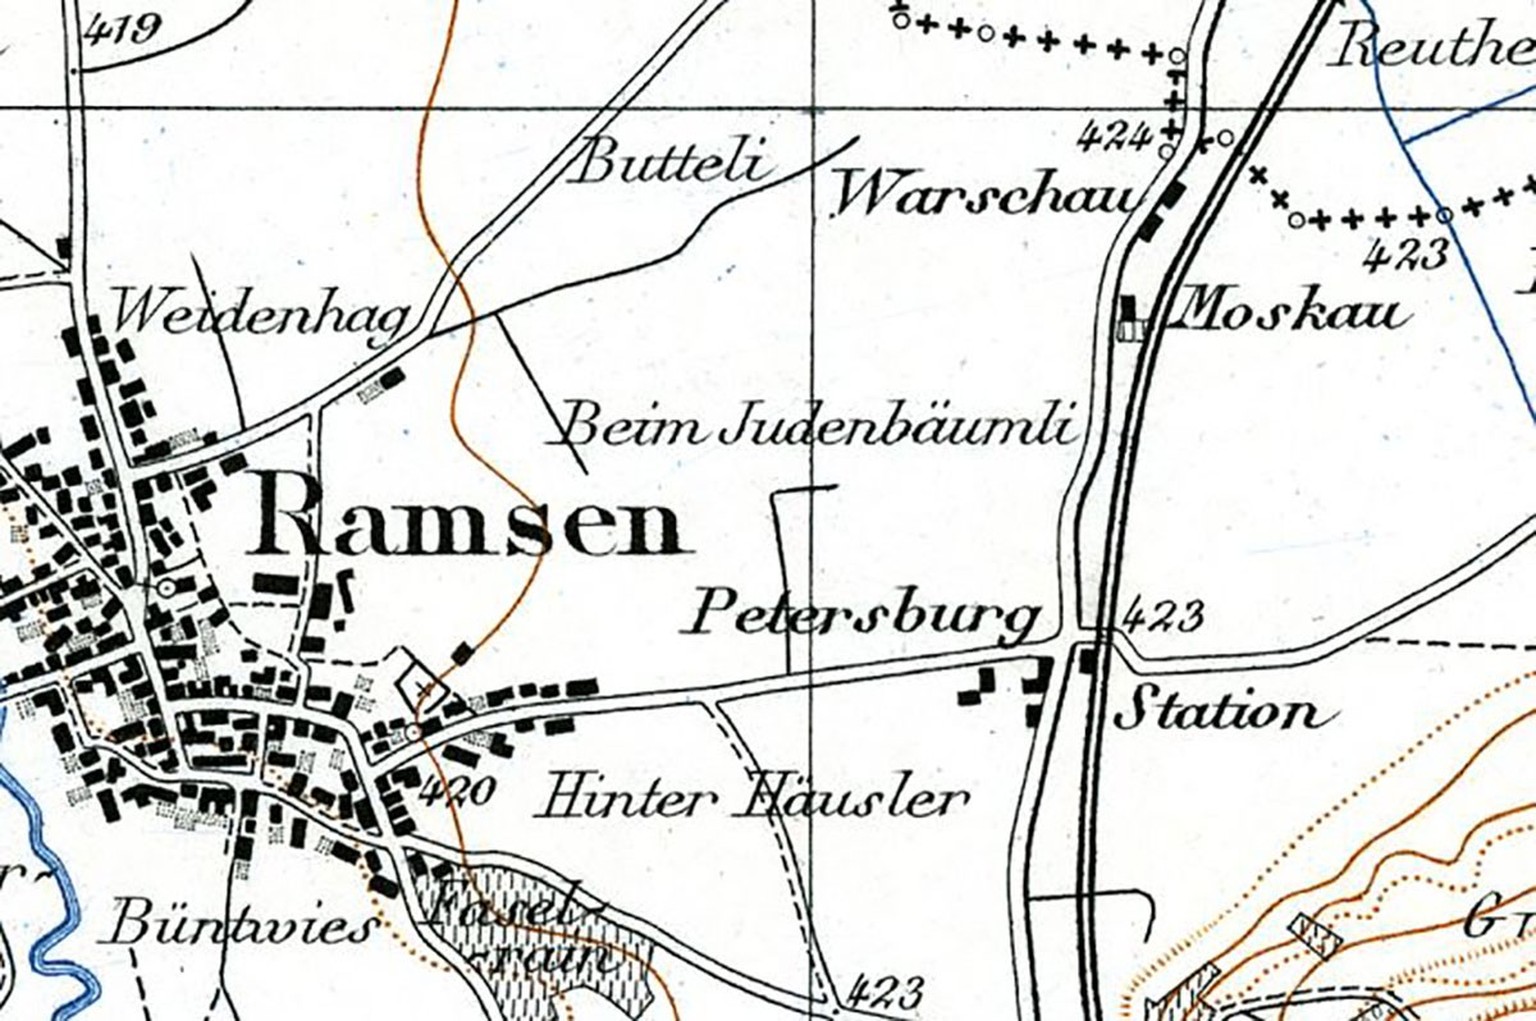 Ramsen with the house names Warsaw, Moscow and Petersburg on the Siegfried map.  https://s.geo.admin.ch/a29c69f768